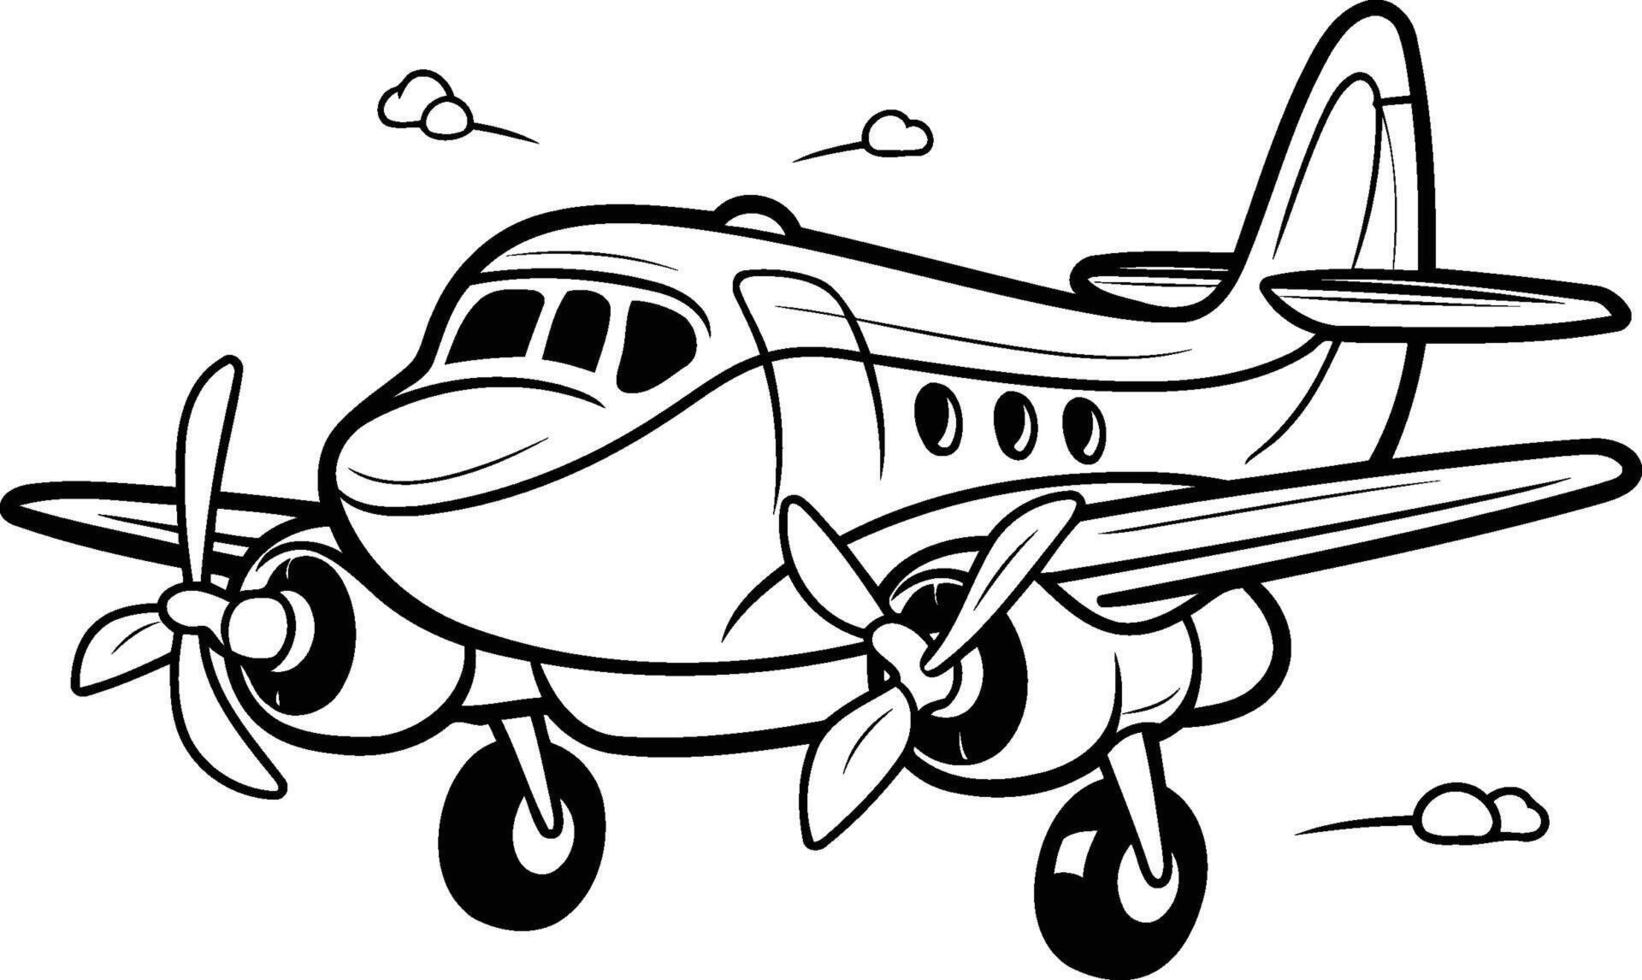 illustration of a small airplane on a white background. Coloring book for children. vector